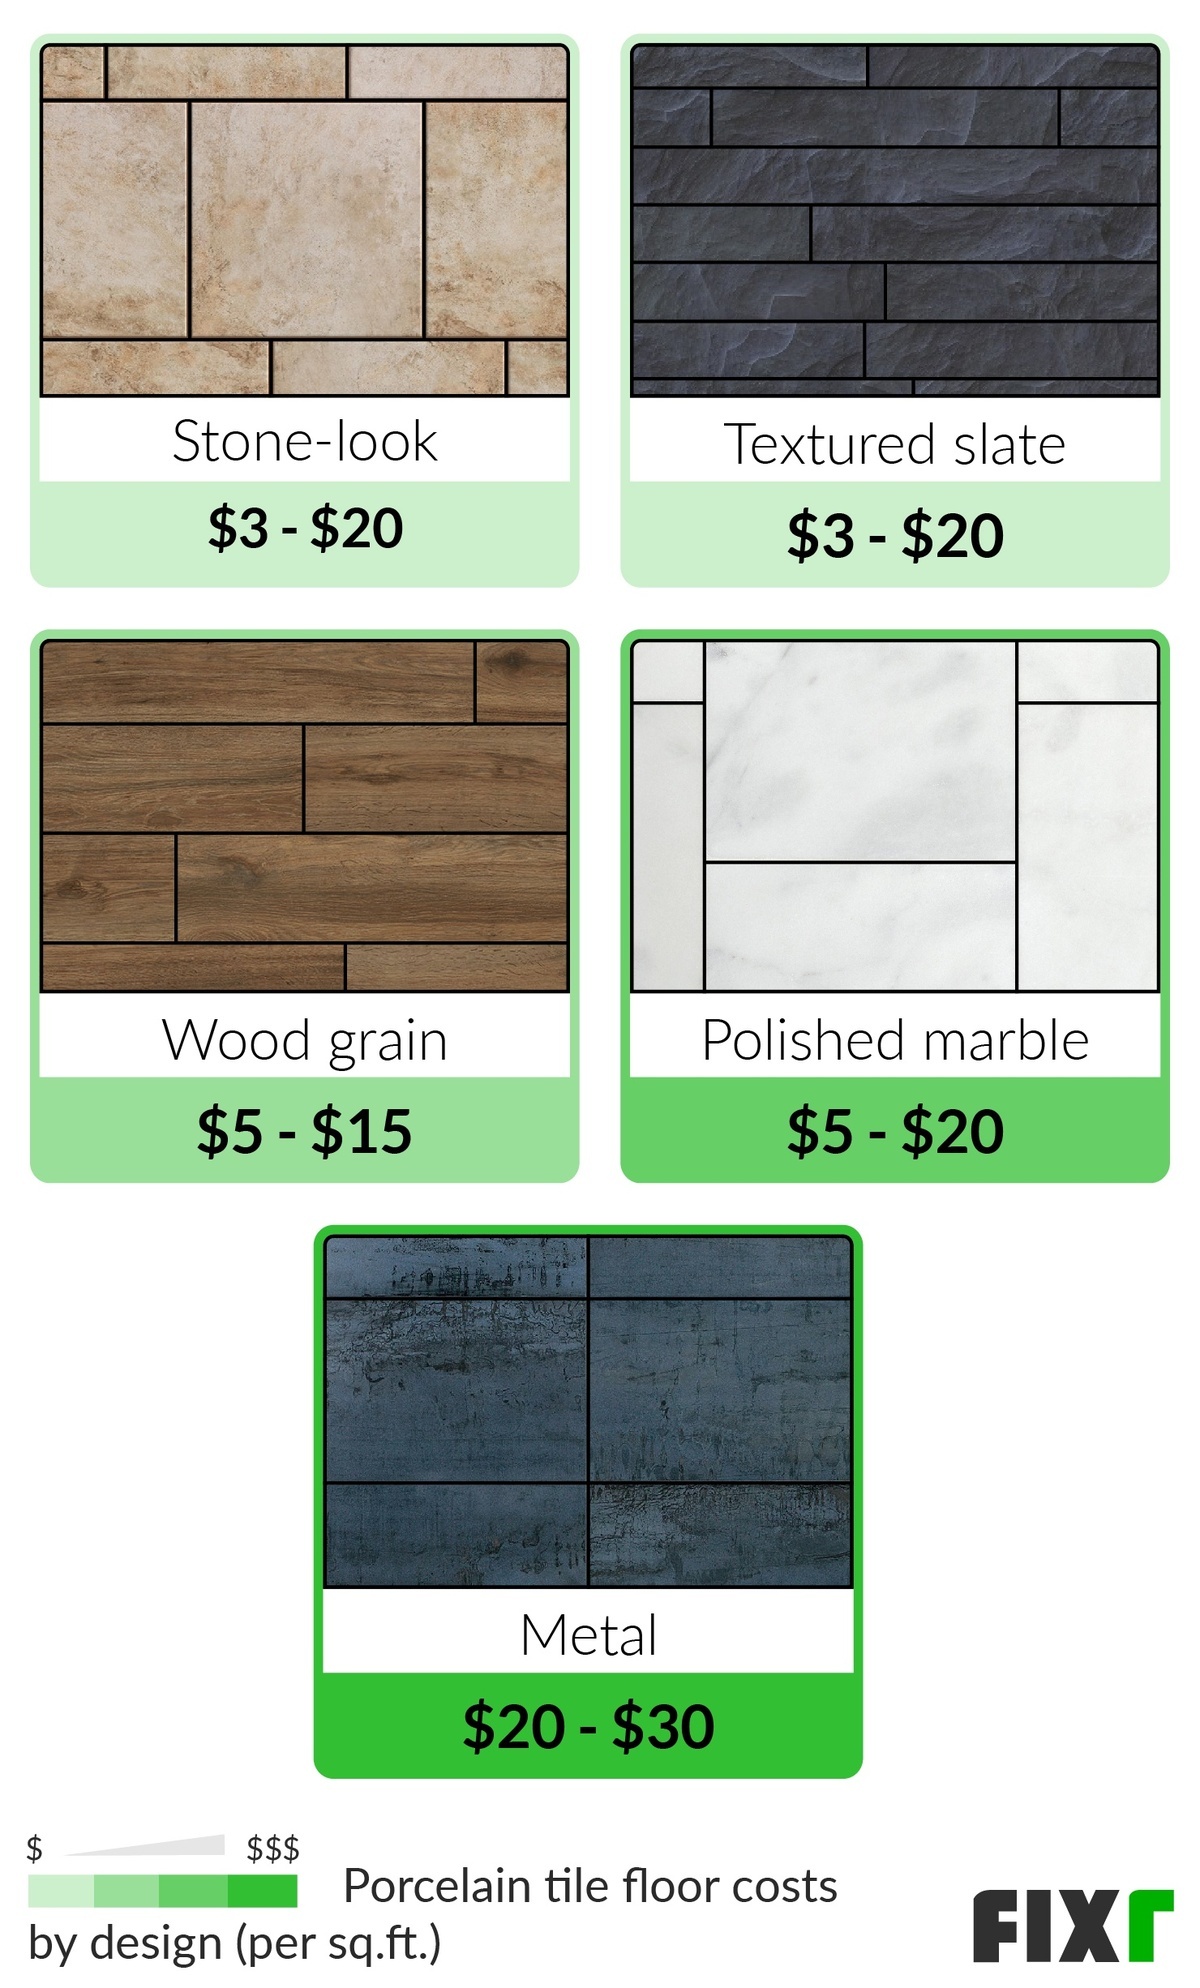 Cost Of Porcelain Tile Flooring, How Much Does Porcelain Tile Flooring Cost Per Square Foot